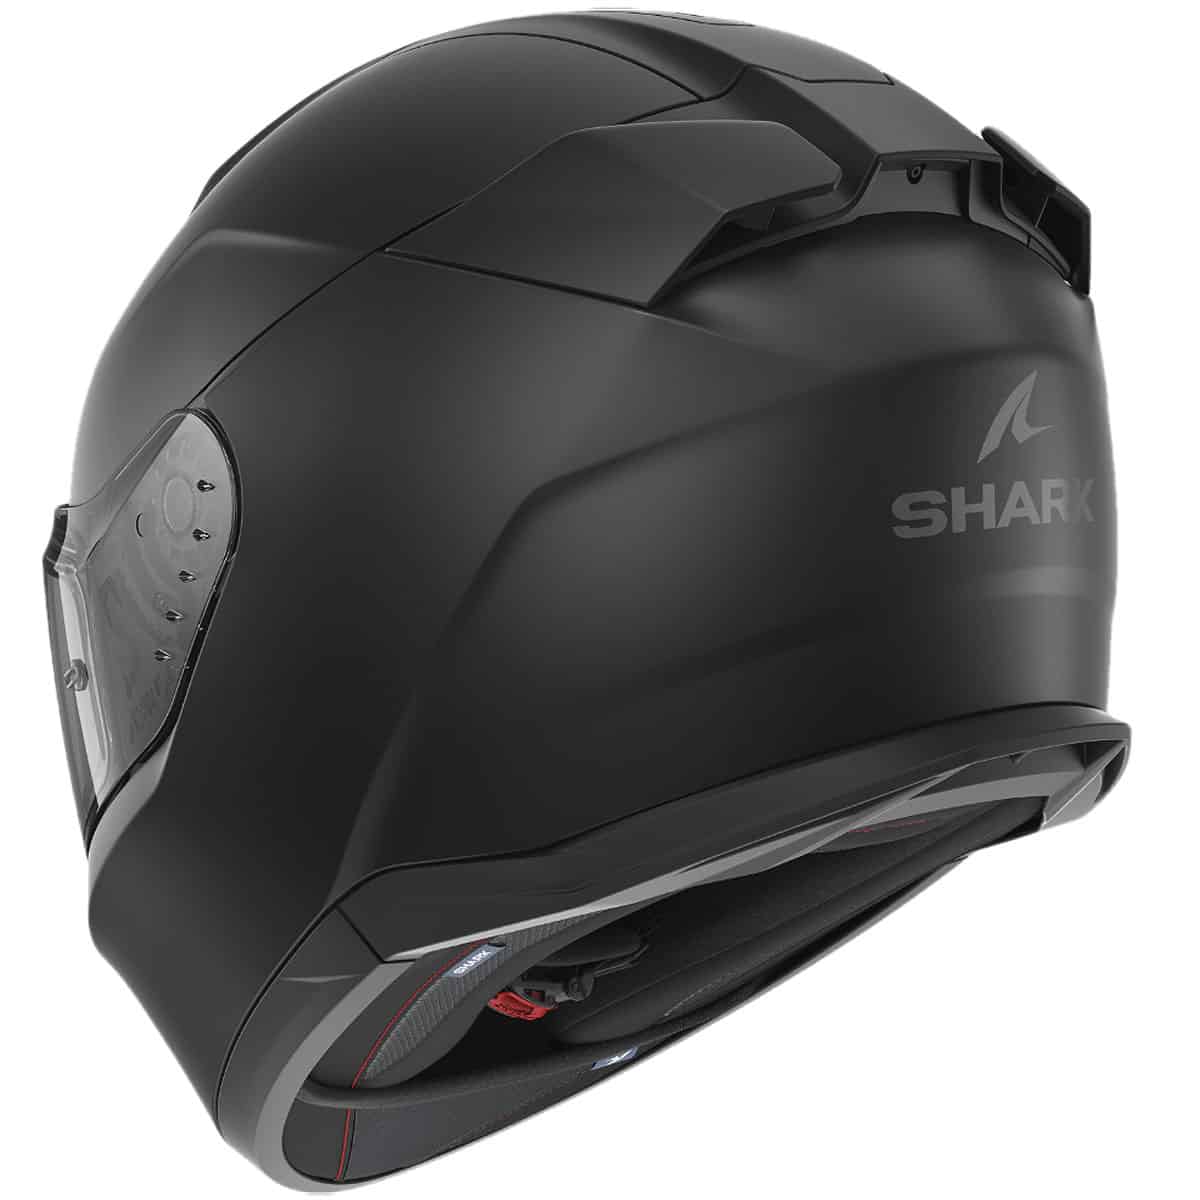 Shark Helmets' D-Skwal 3. This ultra-modern helmet combines an aggressive look with exceptional features like advanced aerodynamics and "BEST FIT" technology for optimal comfort and stability at any speed - front